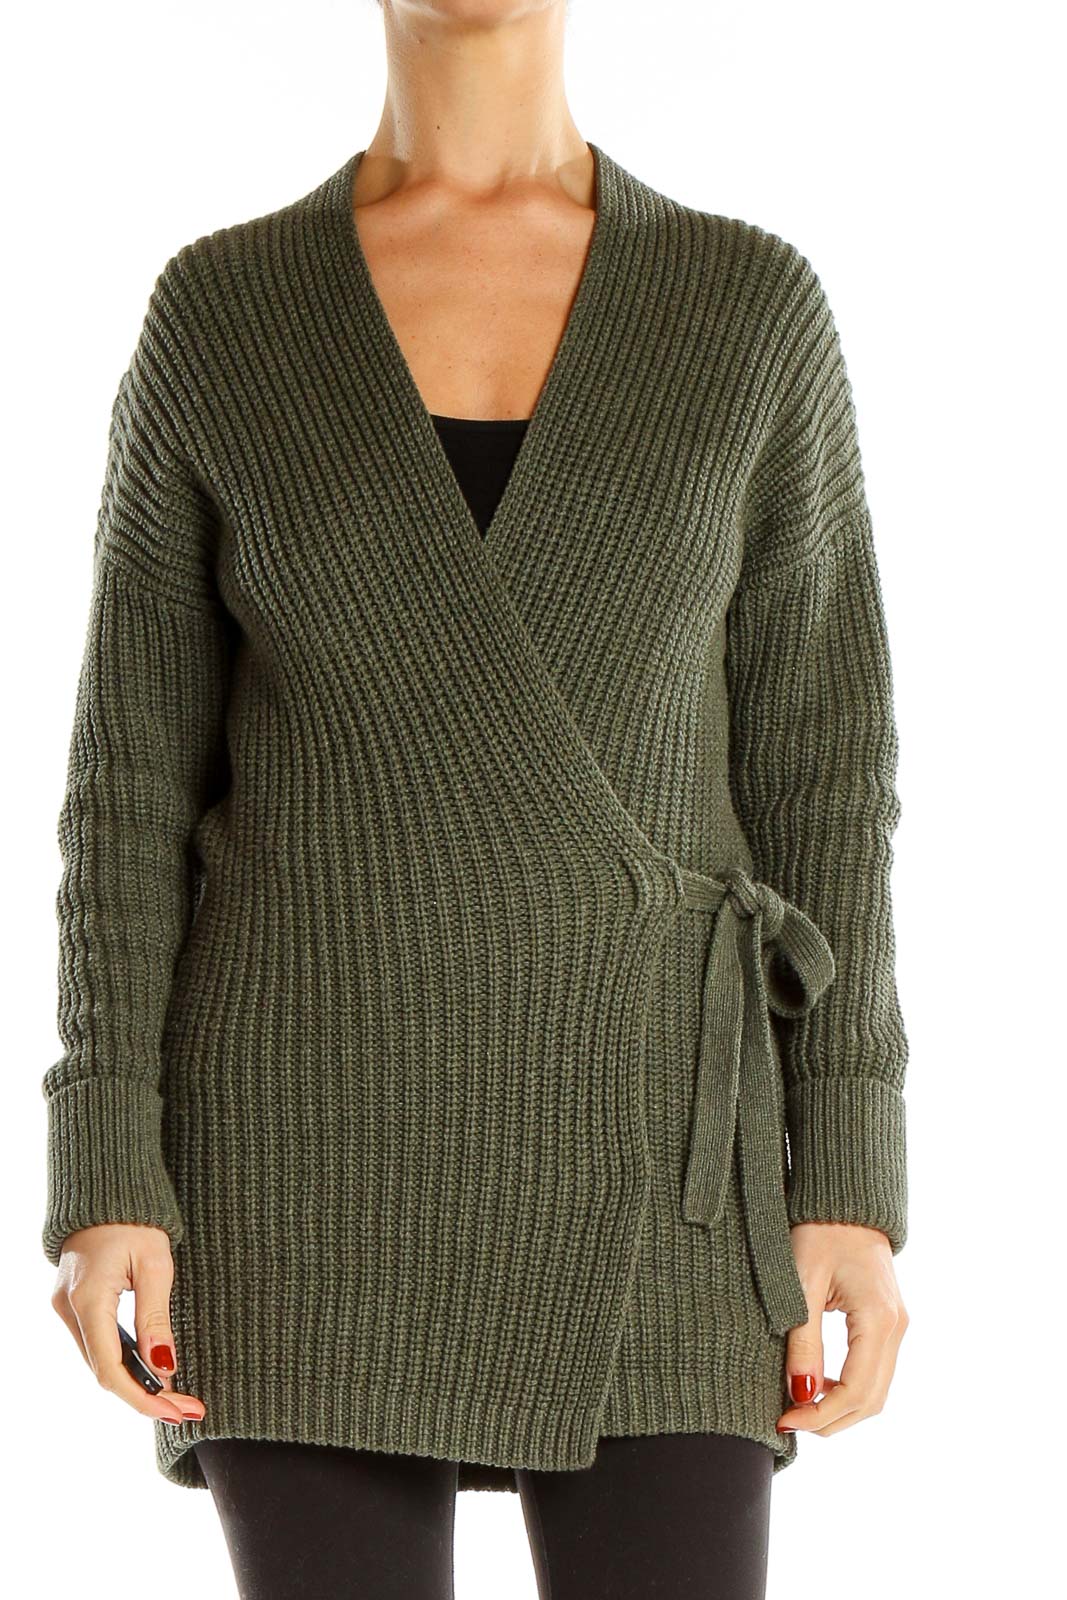 Green Knitted Wrap Sweater Cardigan Front